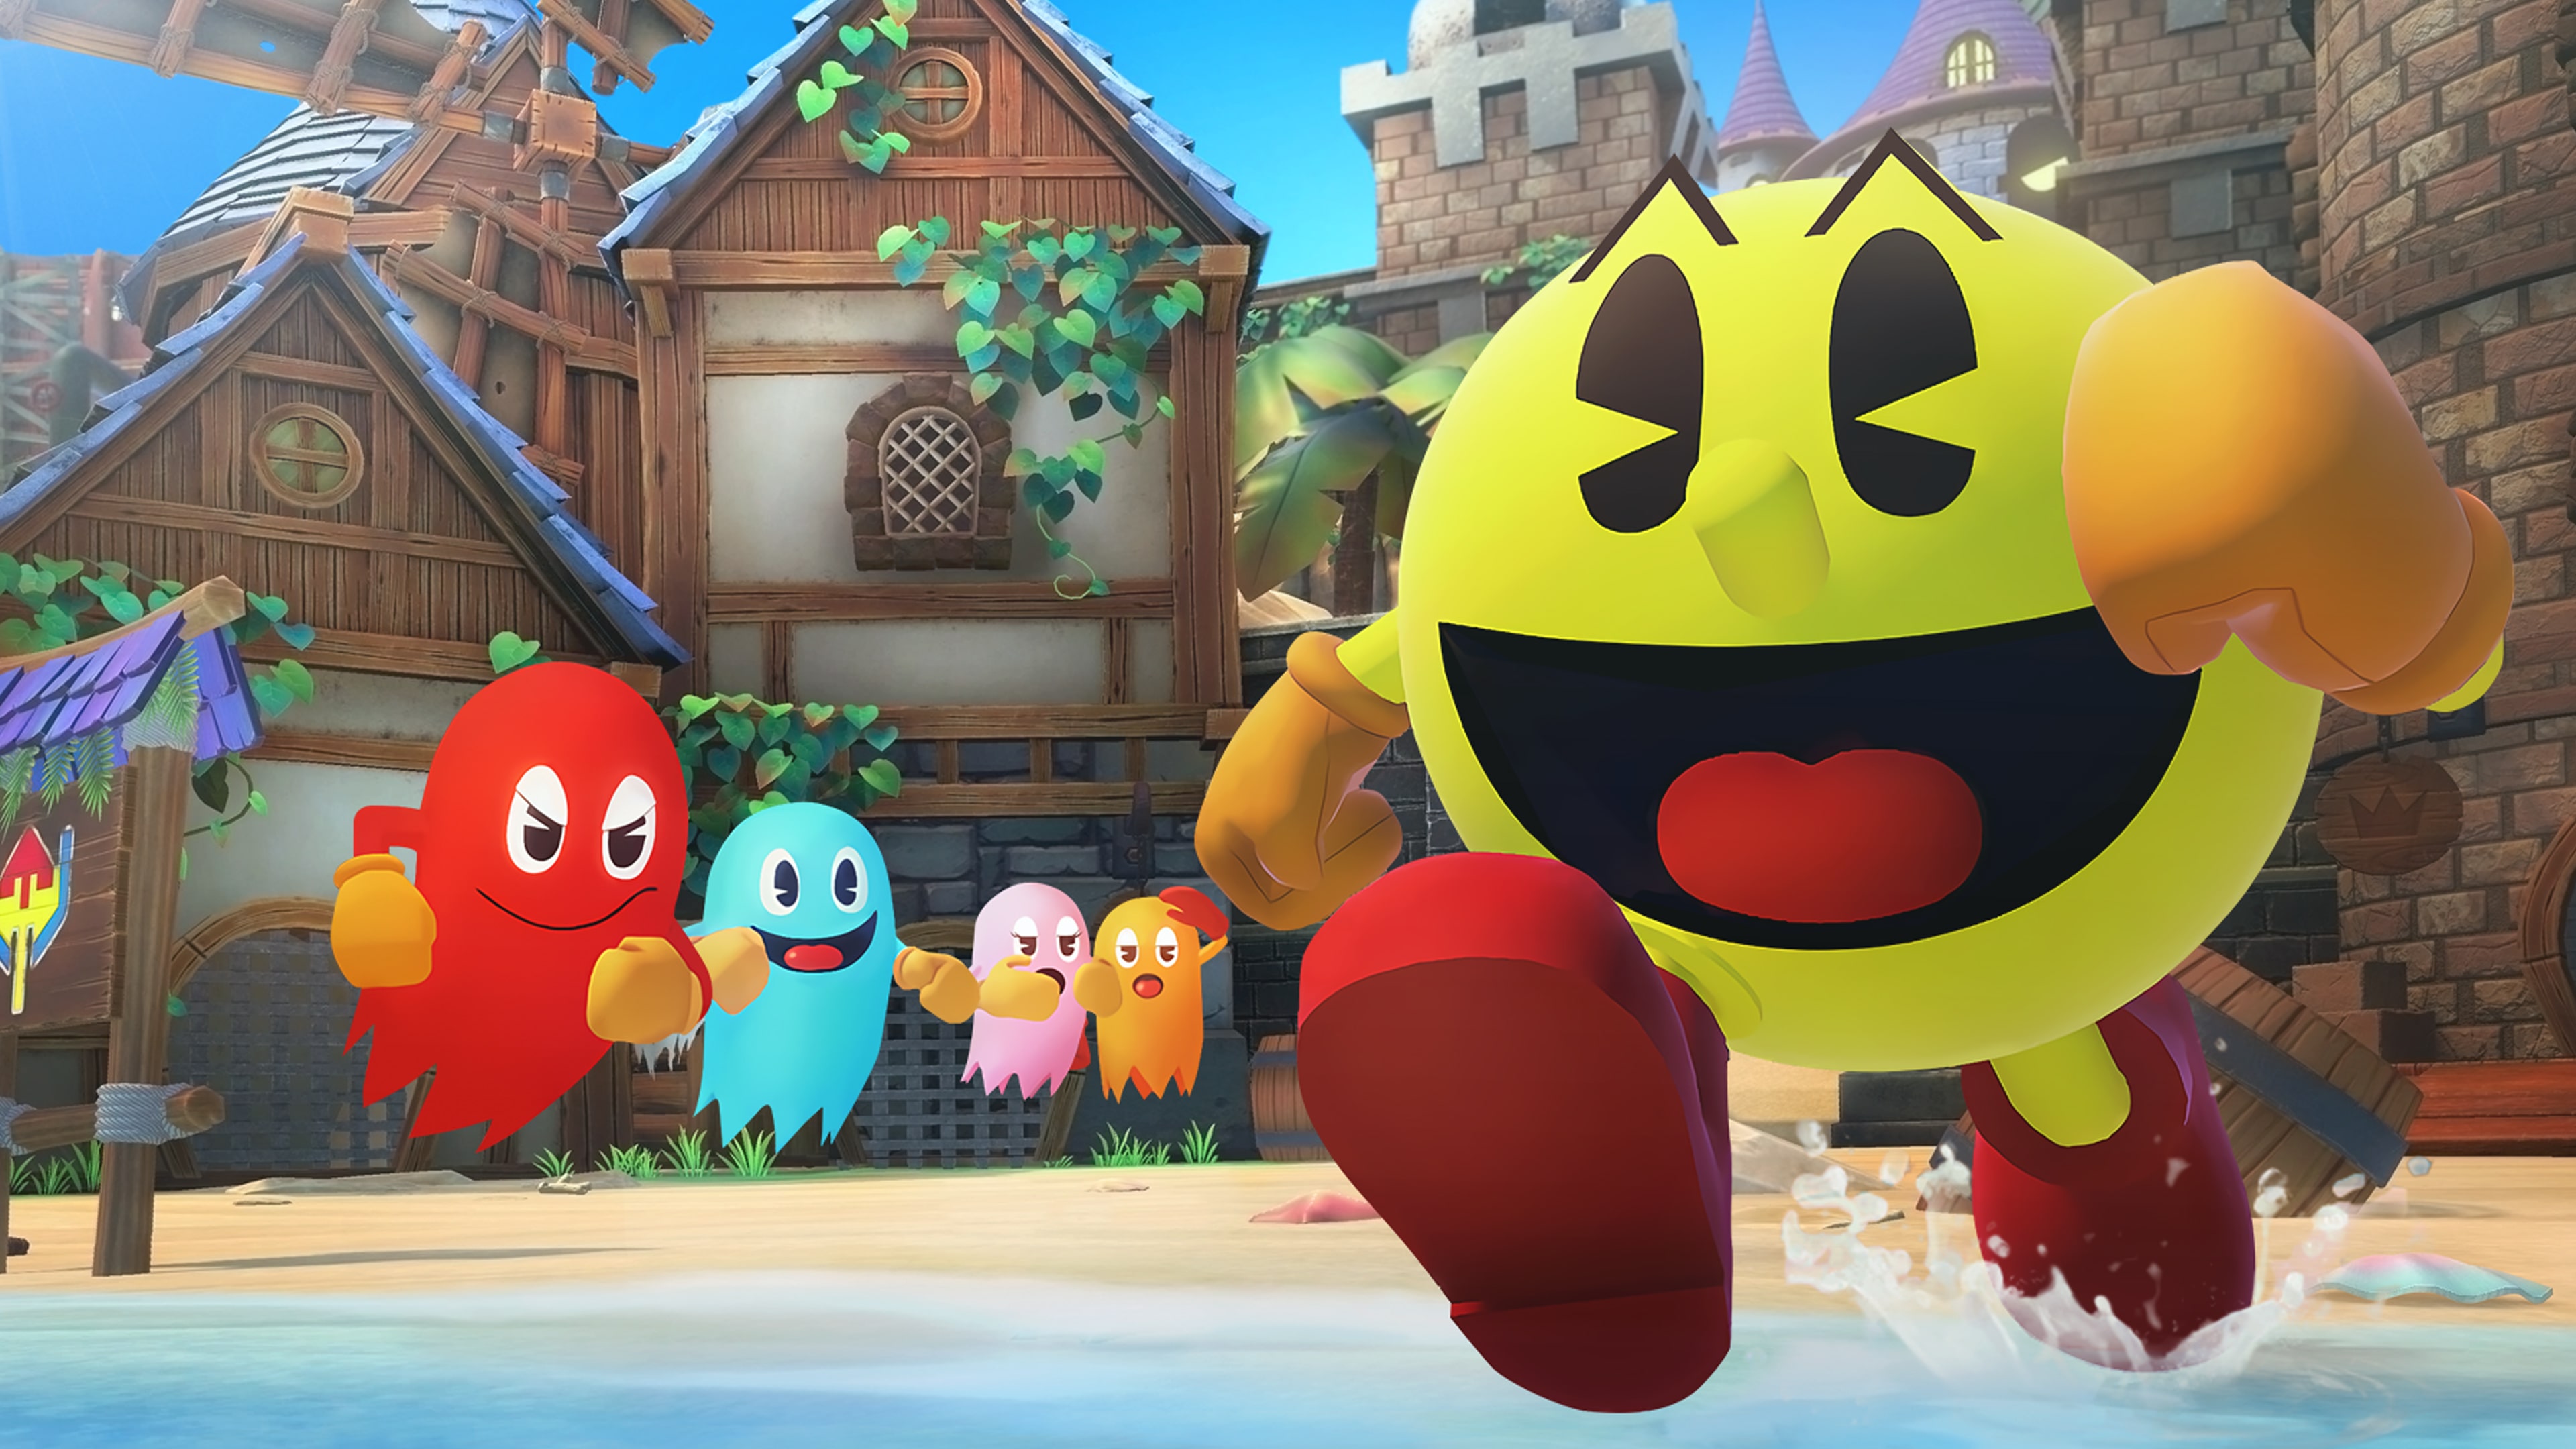 PAC-MAN WORLD Re-PAC PS4 & PS5 (English, Japanese)